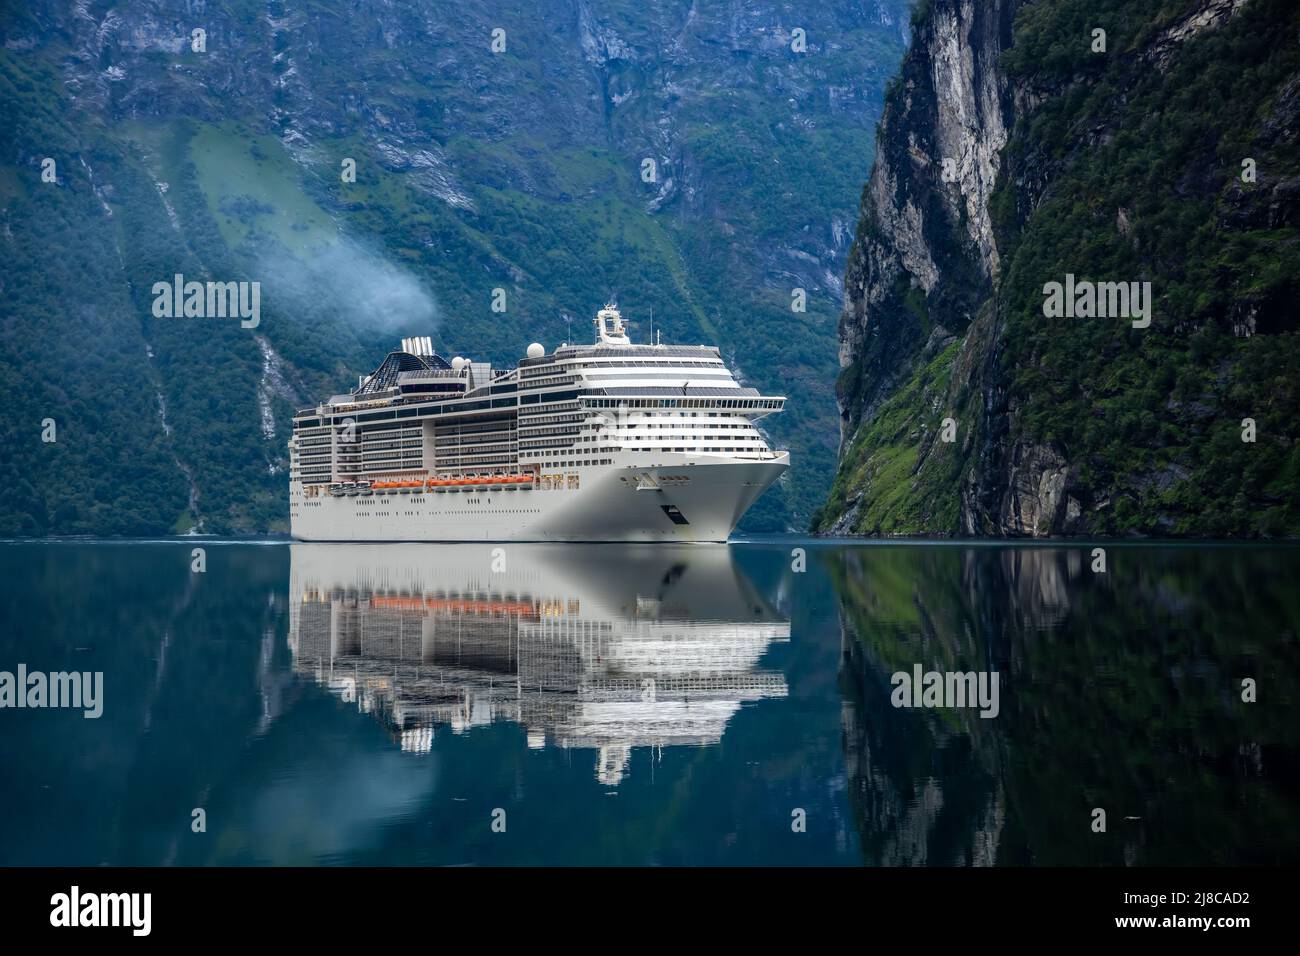 Cruise Ship, Cruise Liners On Geiranger fjord, Norway. The fjord is one of Norway's most visited tourist sites. Geiranger Fjord, a UNESCO World Herita Stock Photo